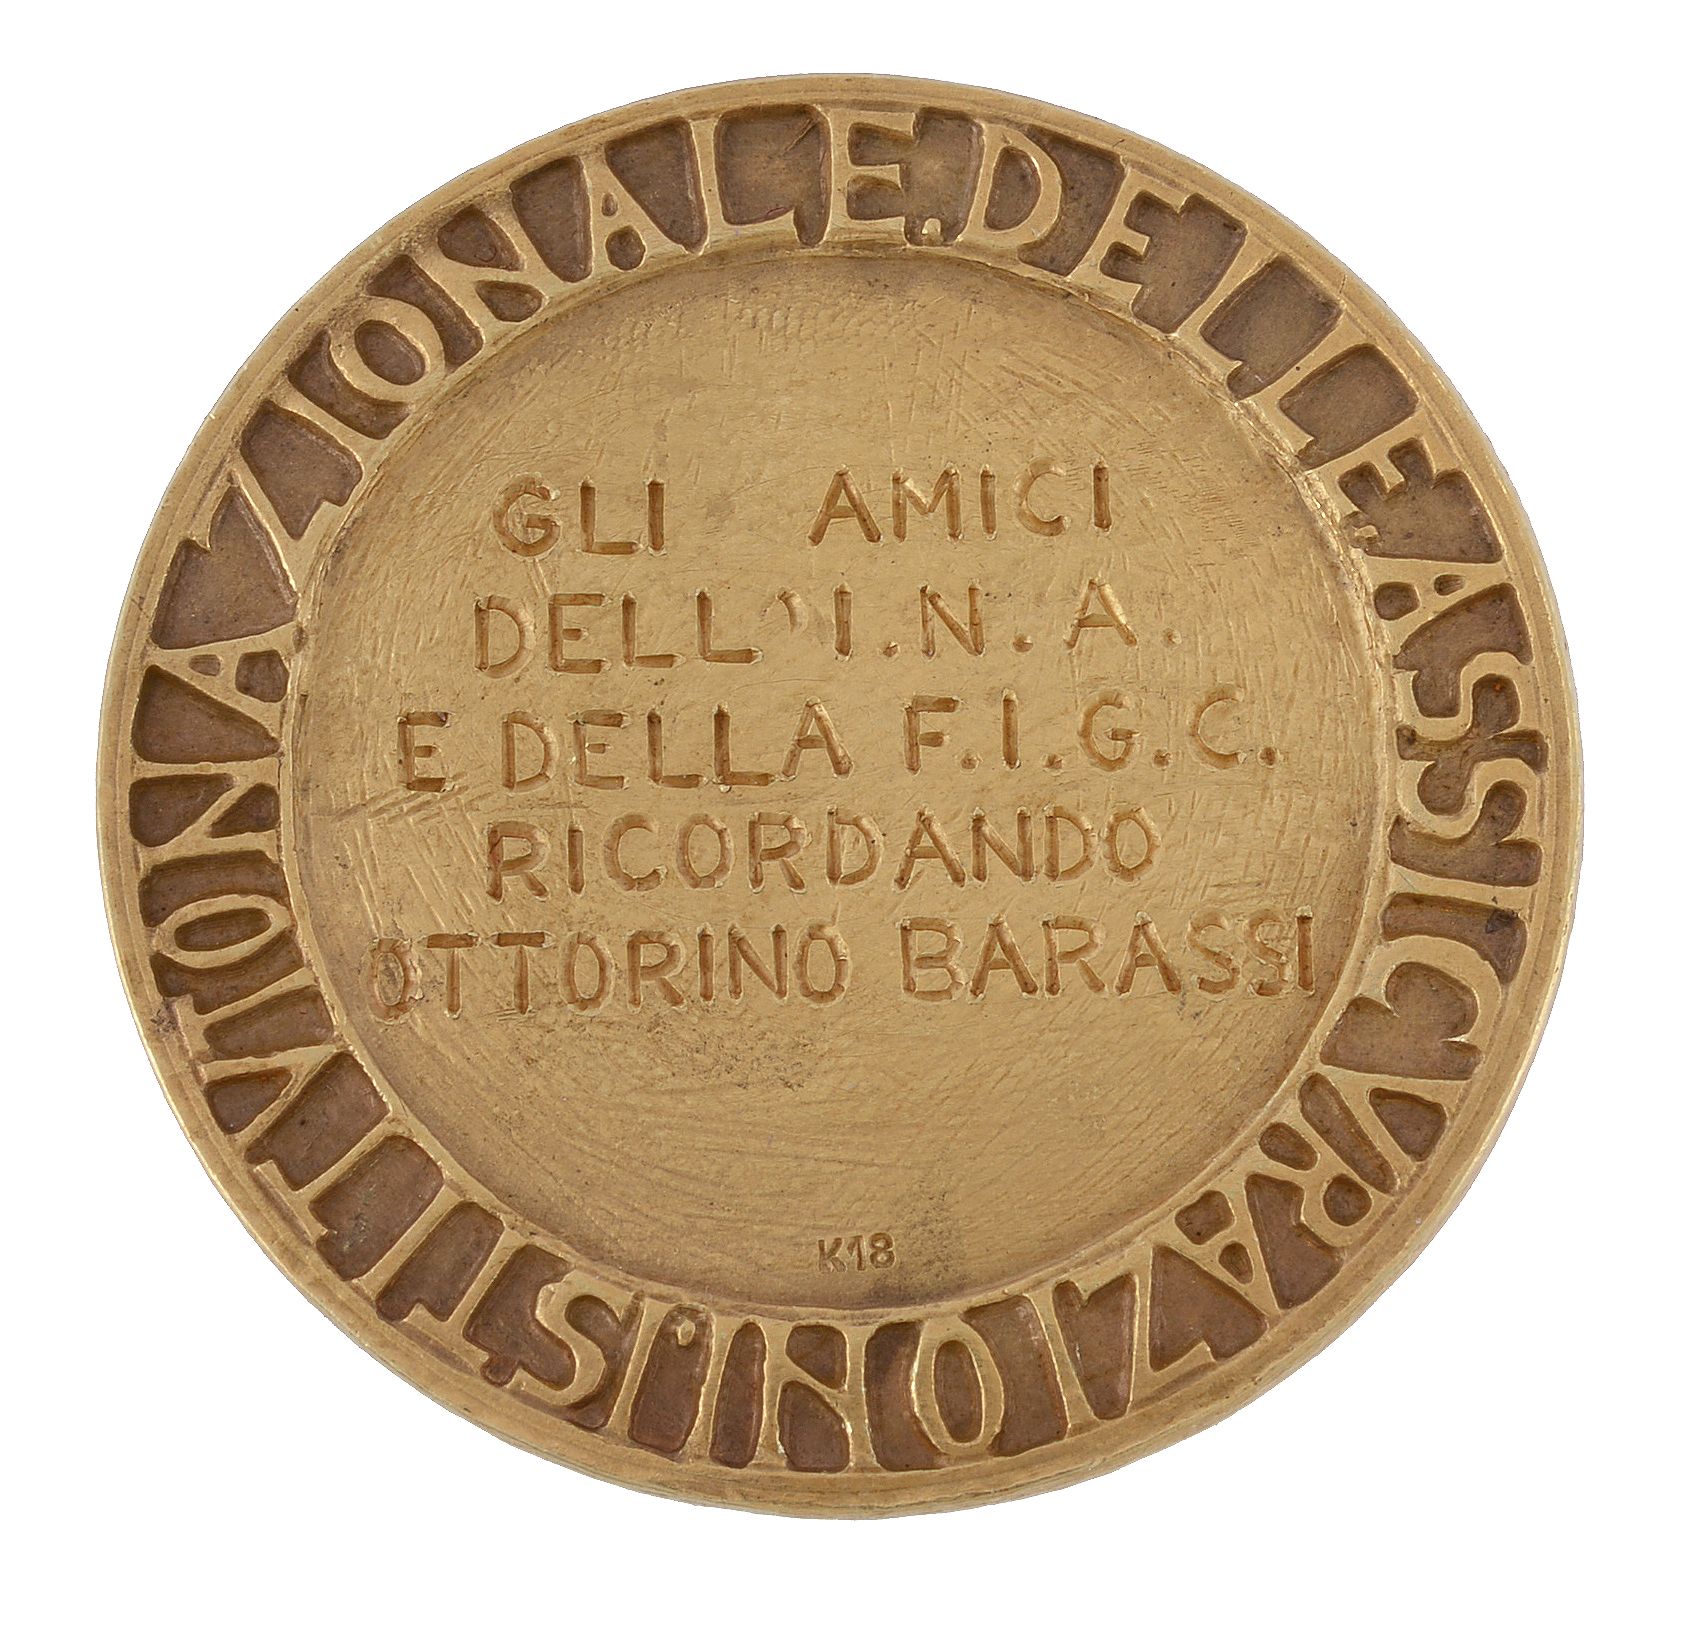 Italy, Istitutona Zionale delle Assicura Zioni, 18 carat gold prize medal by G. Mammussi, strongman - Image 2 of 2